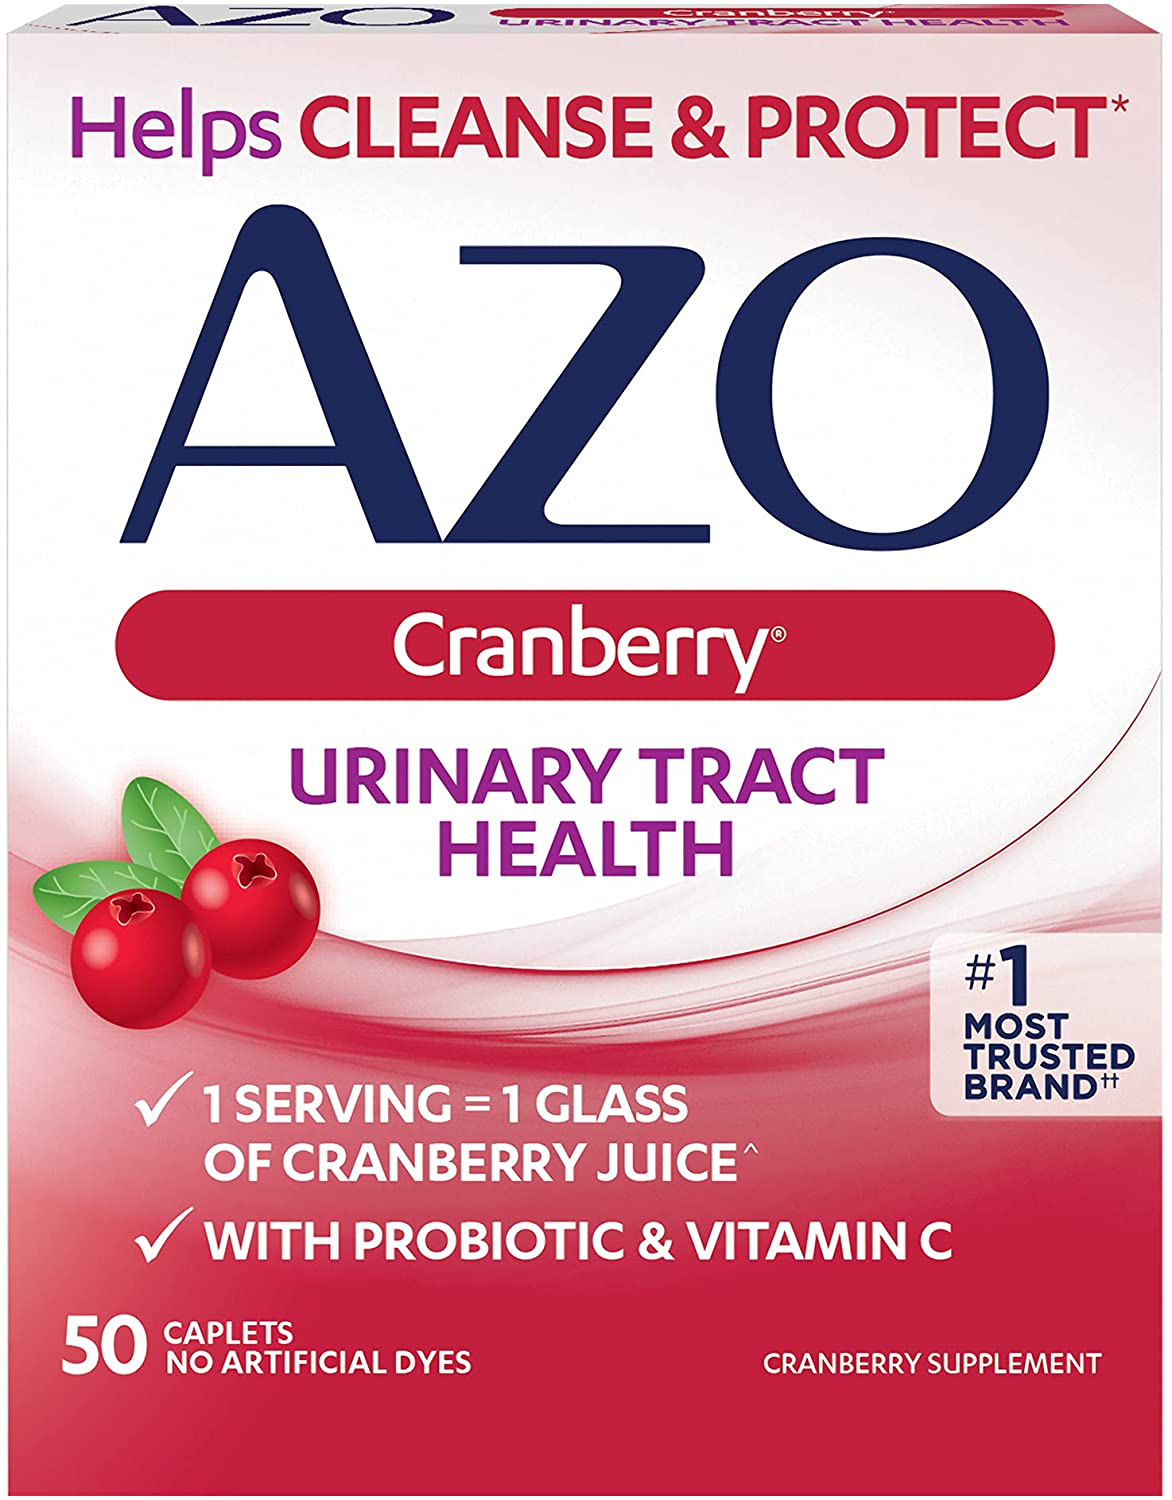 AZO Cranberry Urinary Tract Health Dietary Supplement, 1 Serving = 1 Glass of Cranberry Juice, Sugar Free